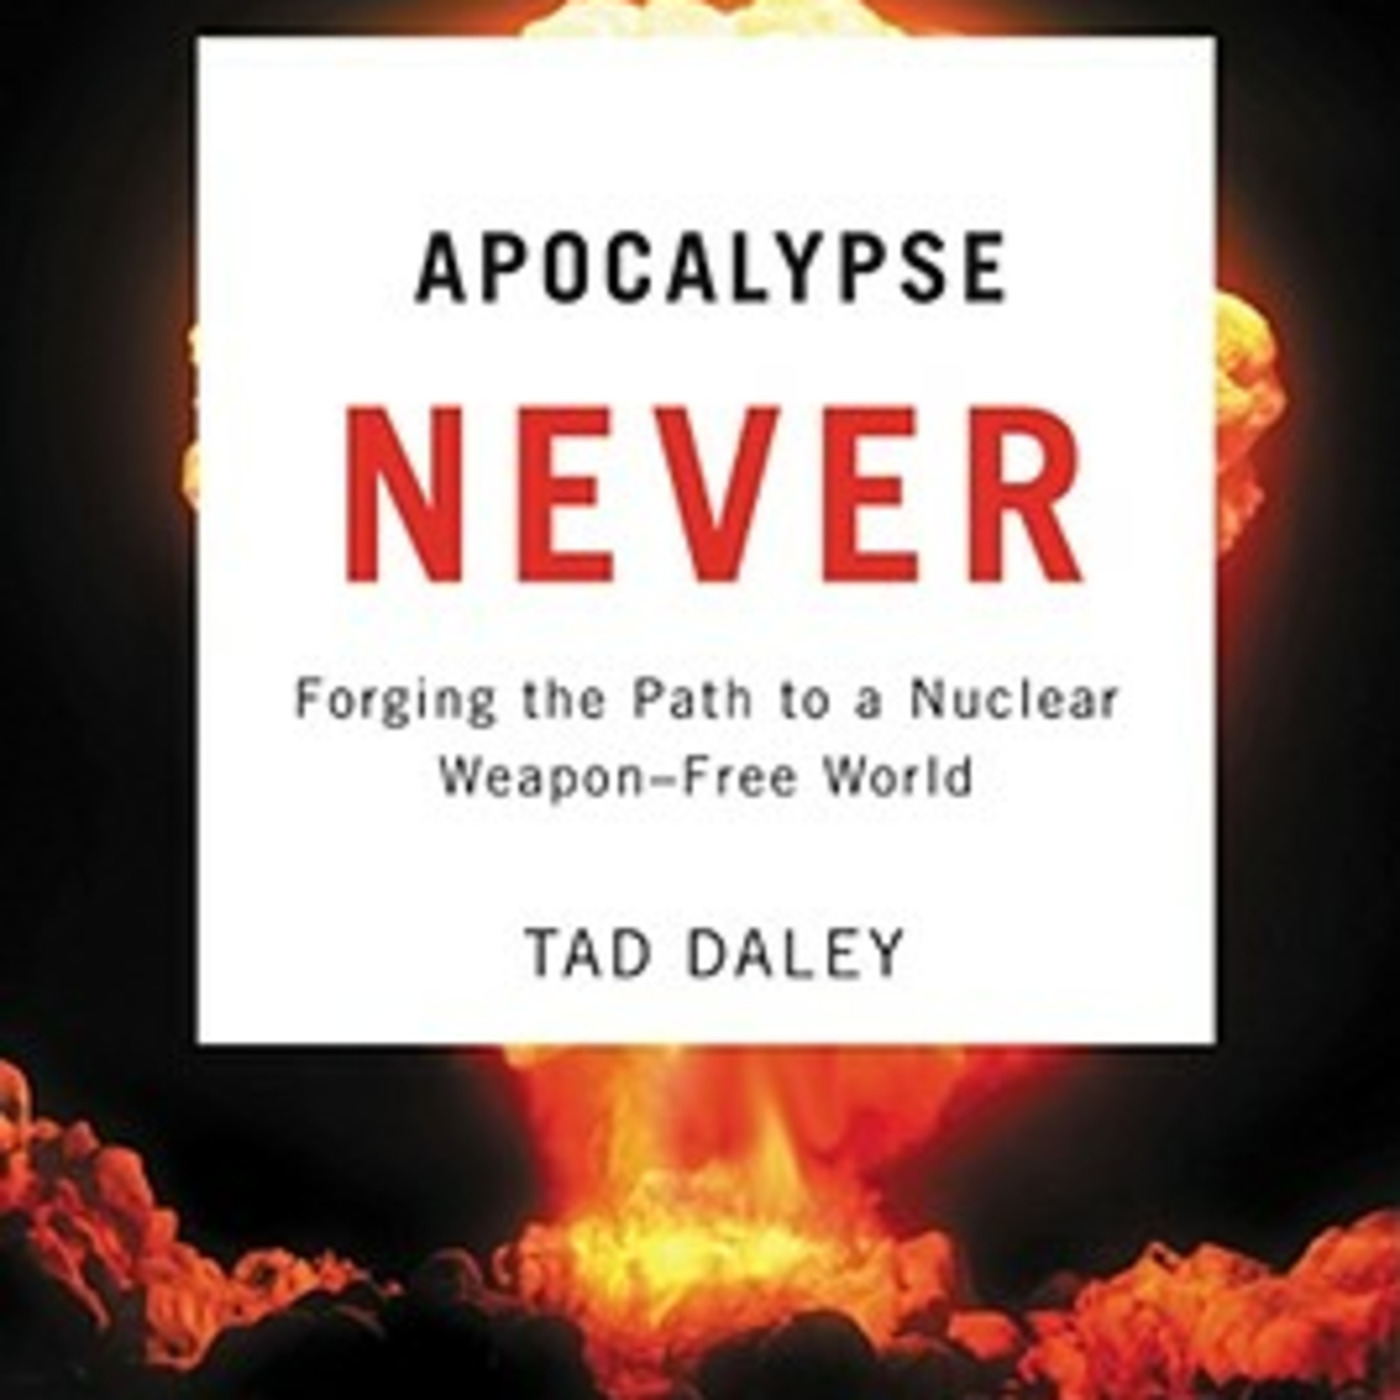 Q&A: TAD DALEY, International Physicians for the Prevention of Nuclear War & Author